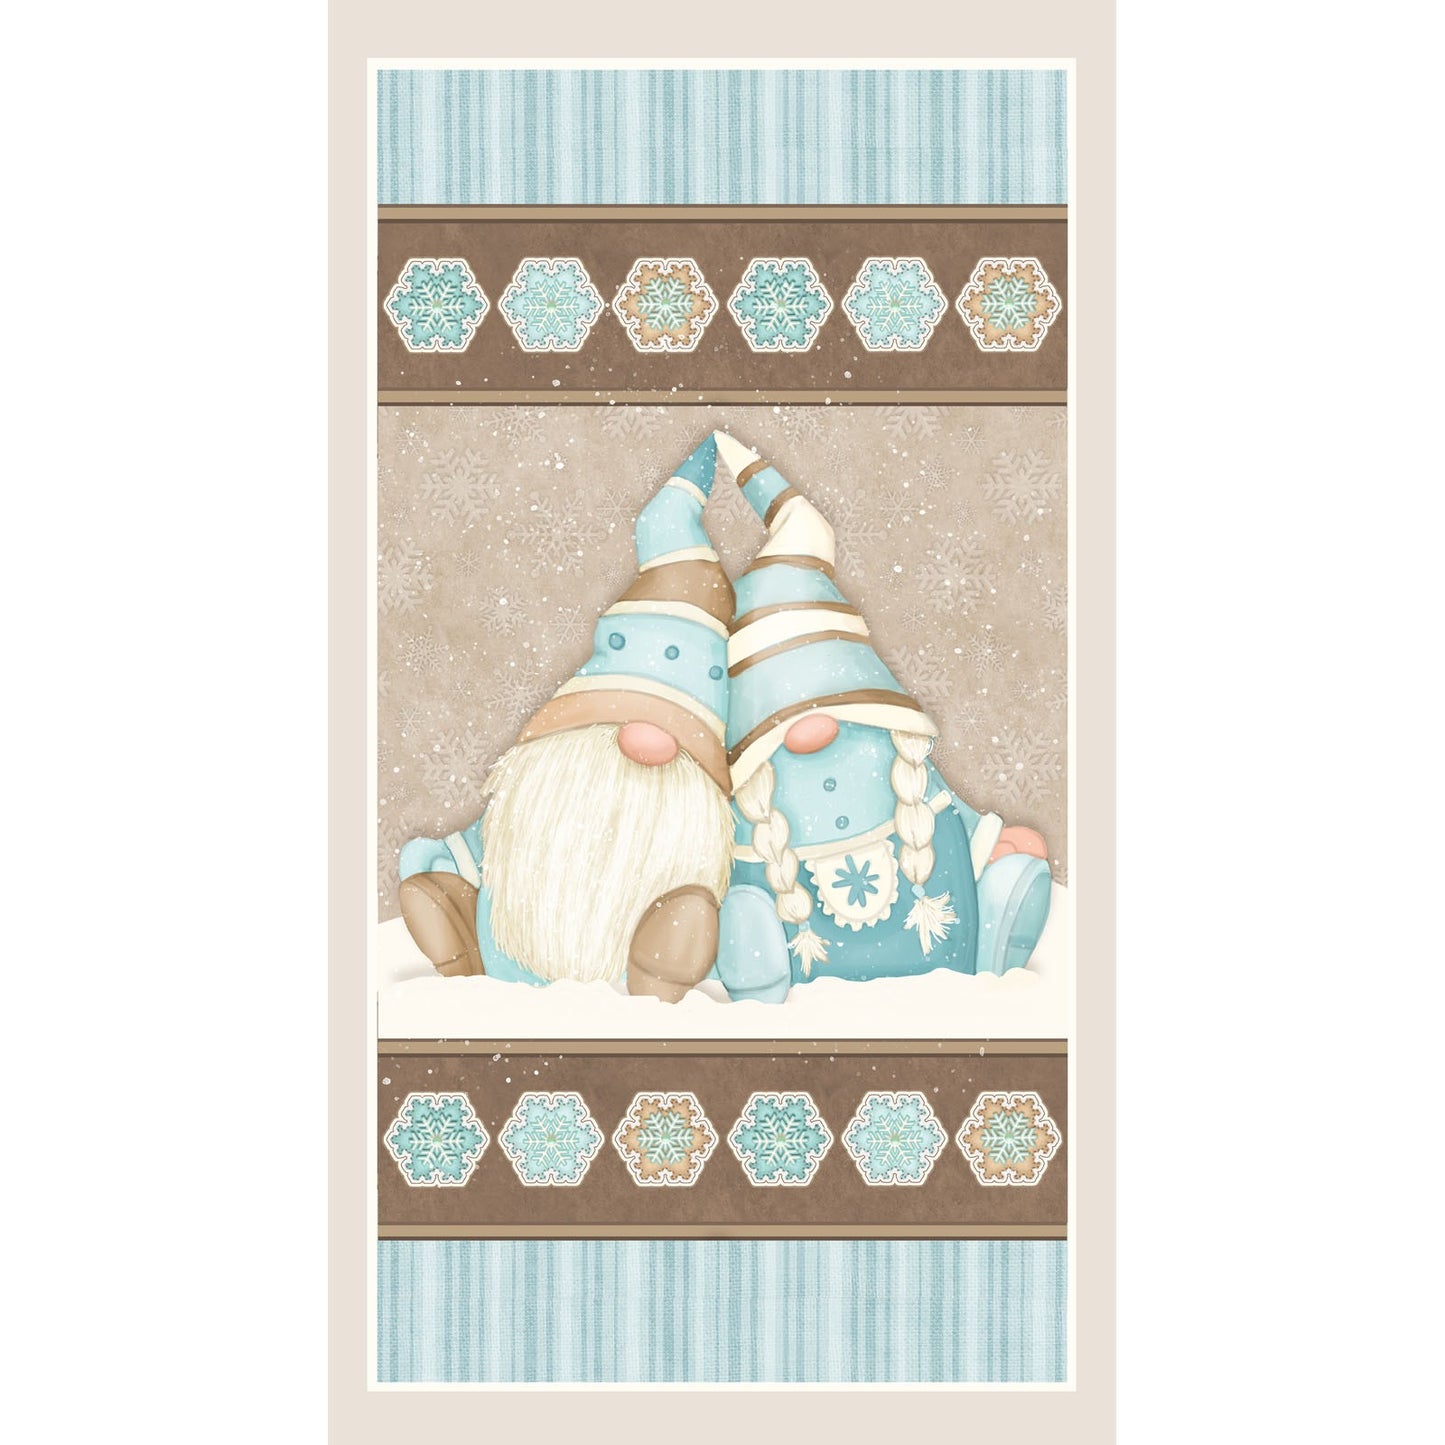 44 x 24 Flannel Gnome Panel I Love Sn’Gnomies Henry Glass Christmas 100% Cotton